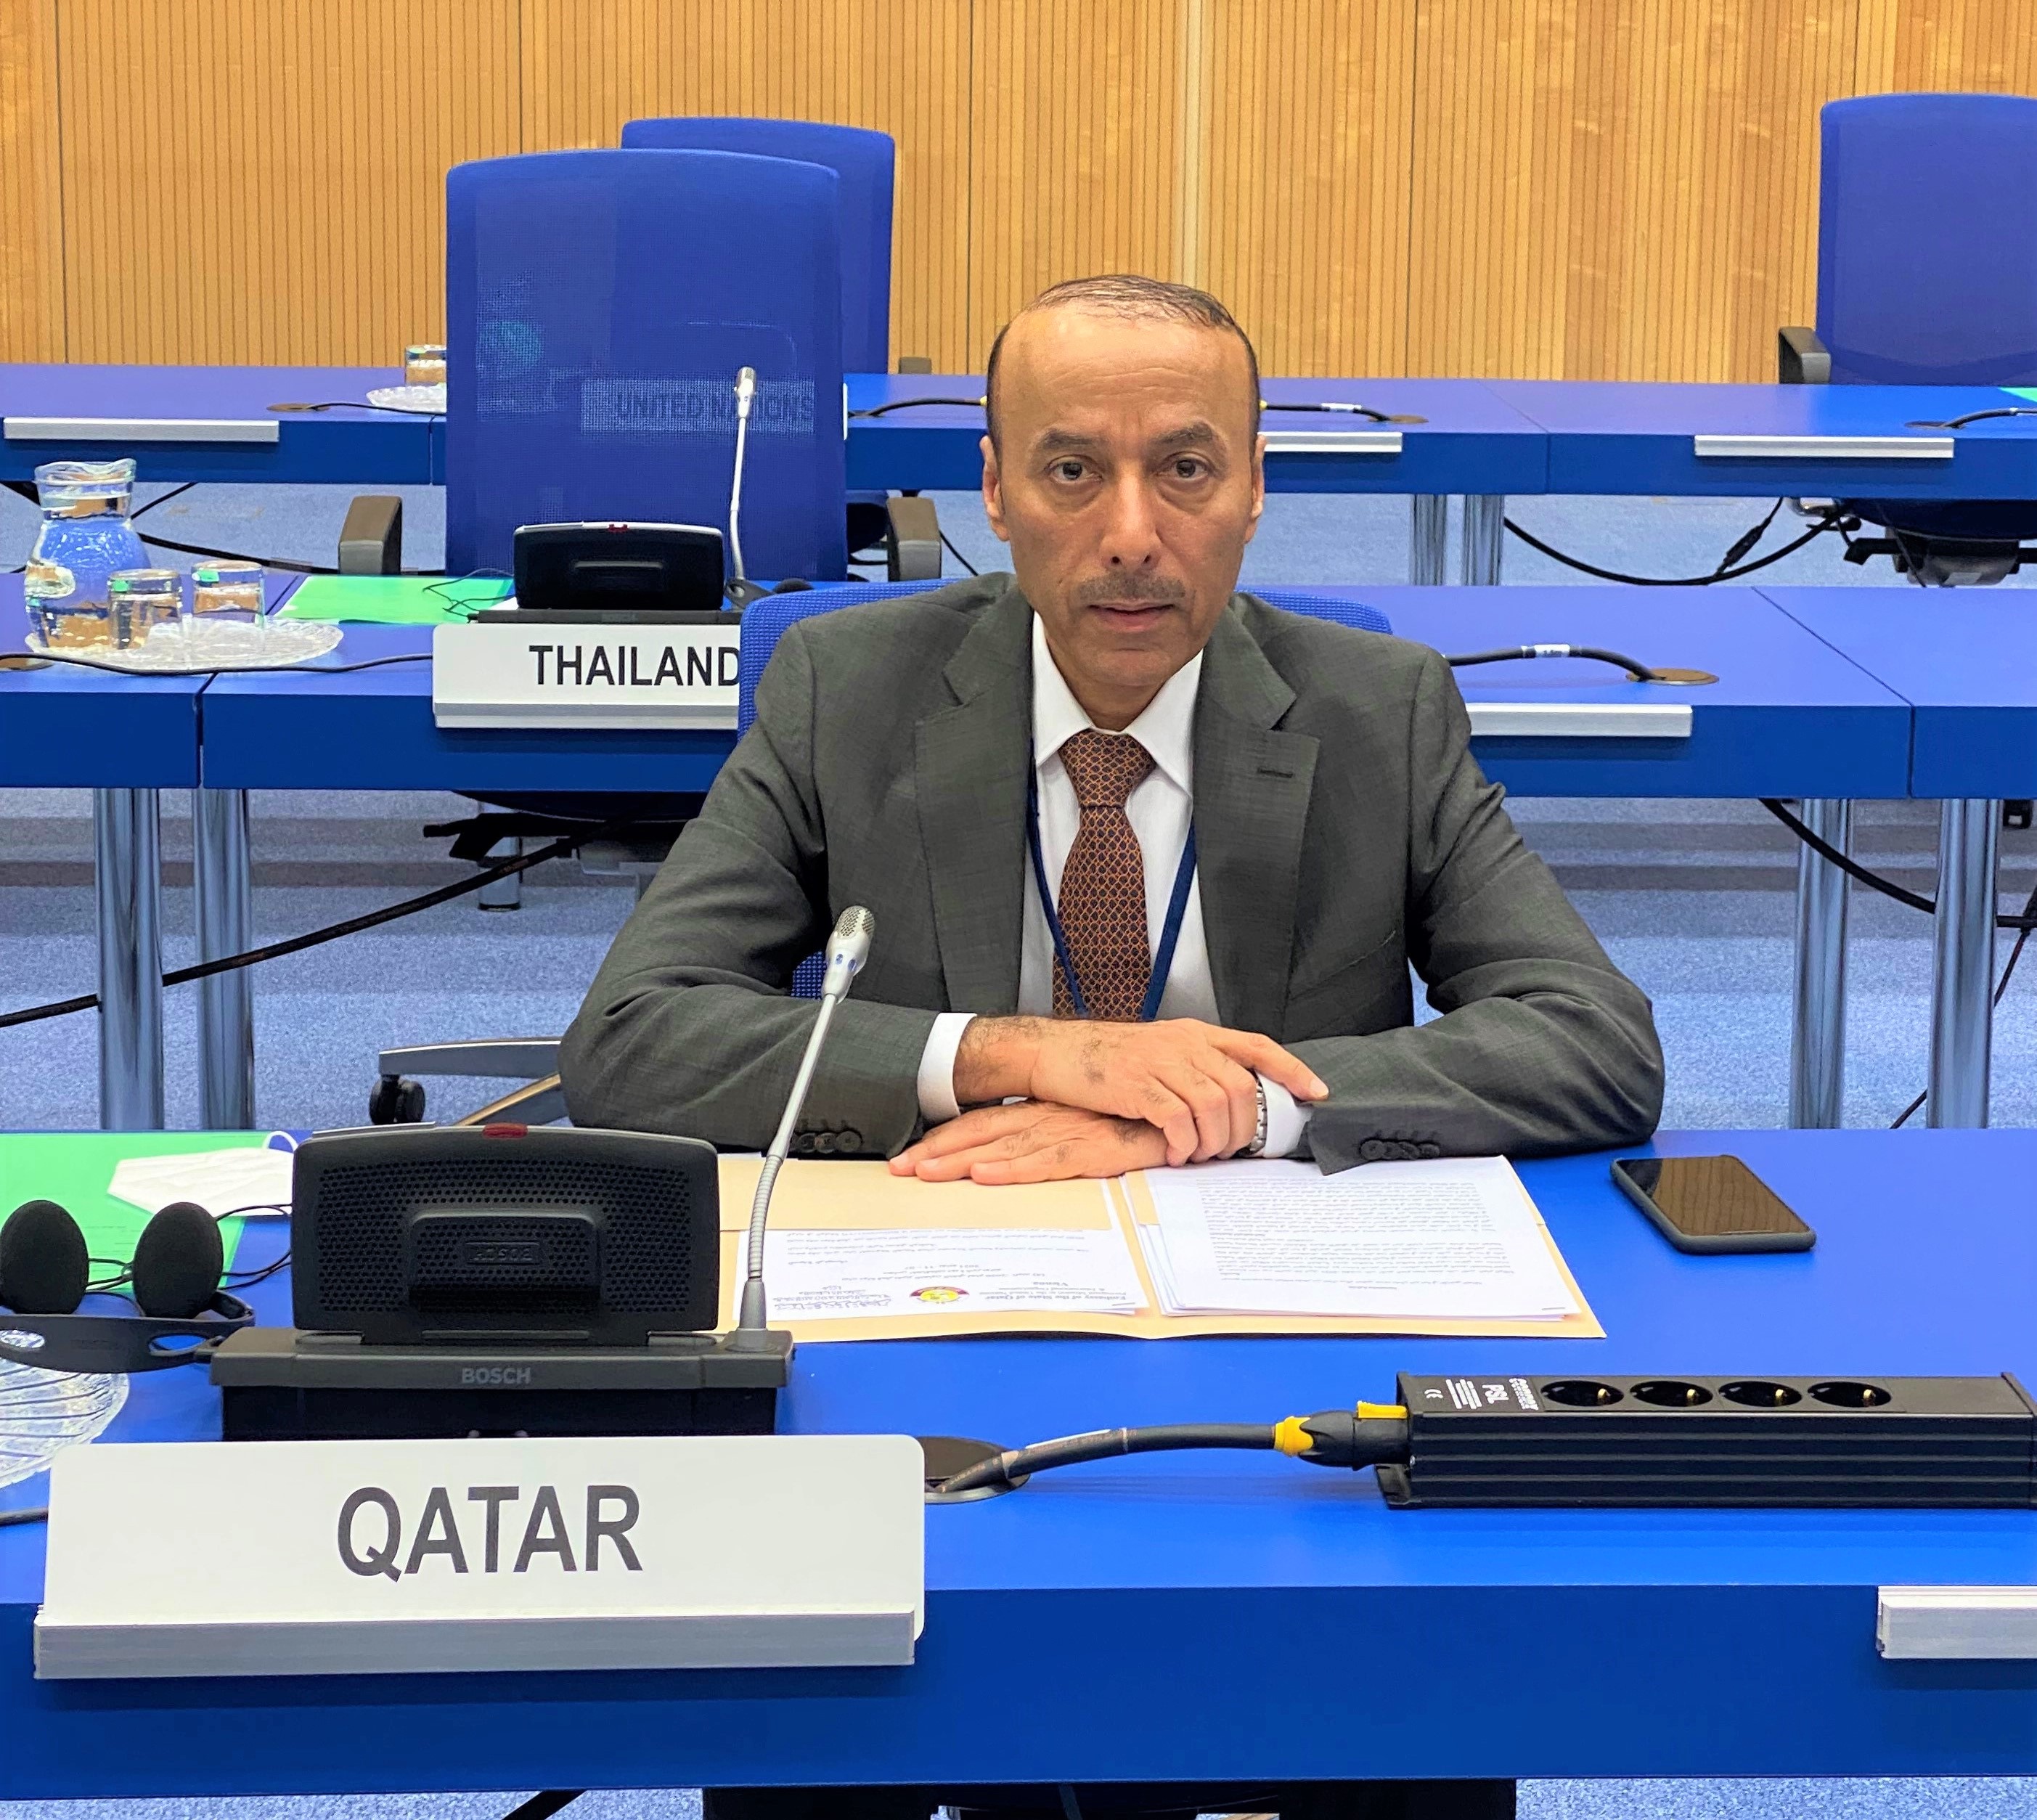 Qatar Calls on Israel to Cooperate with IAEA and Open its Reactors to Inspectors